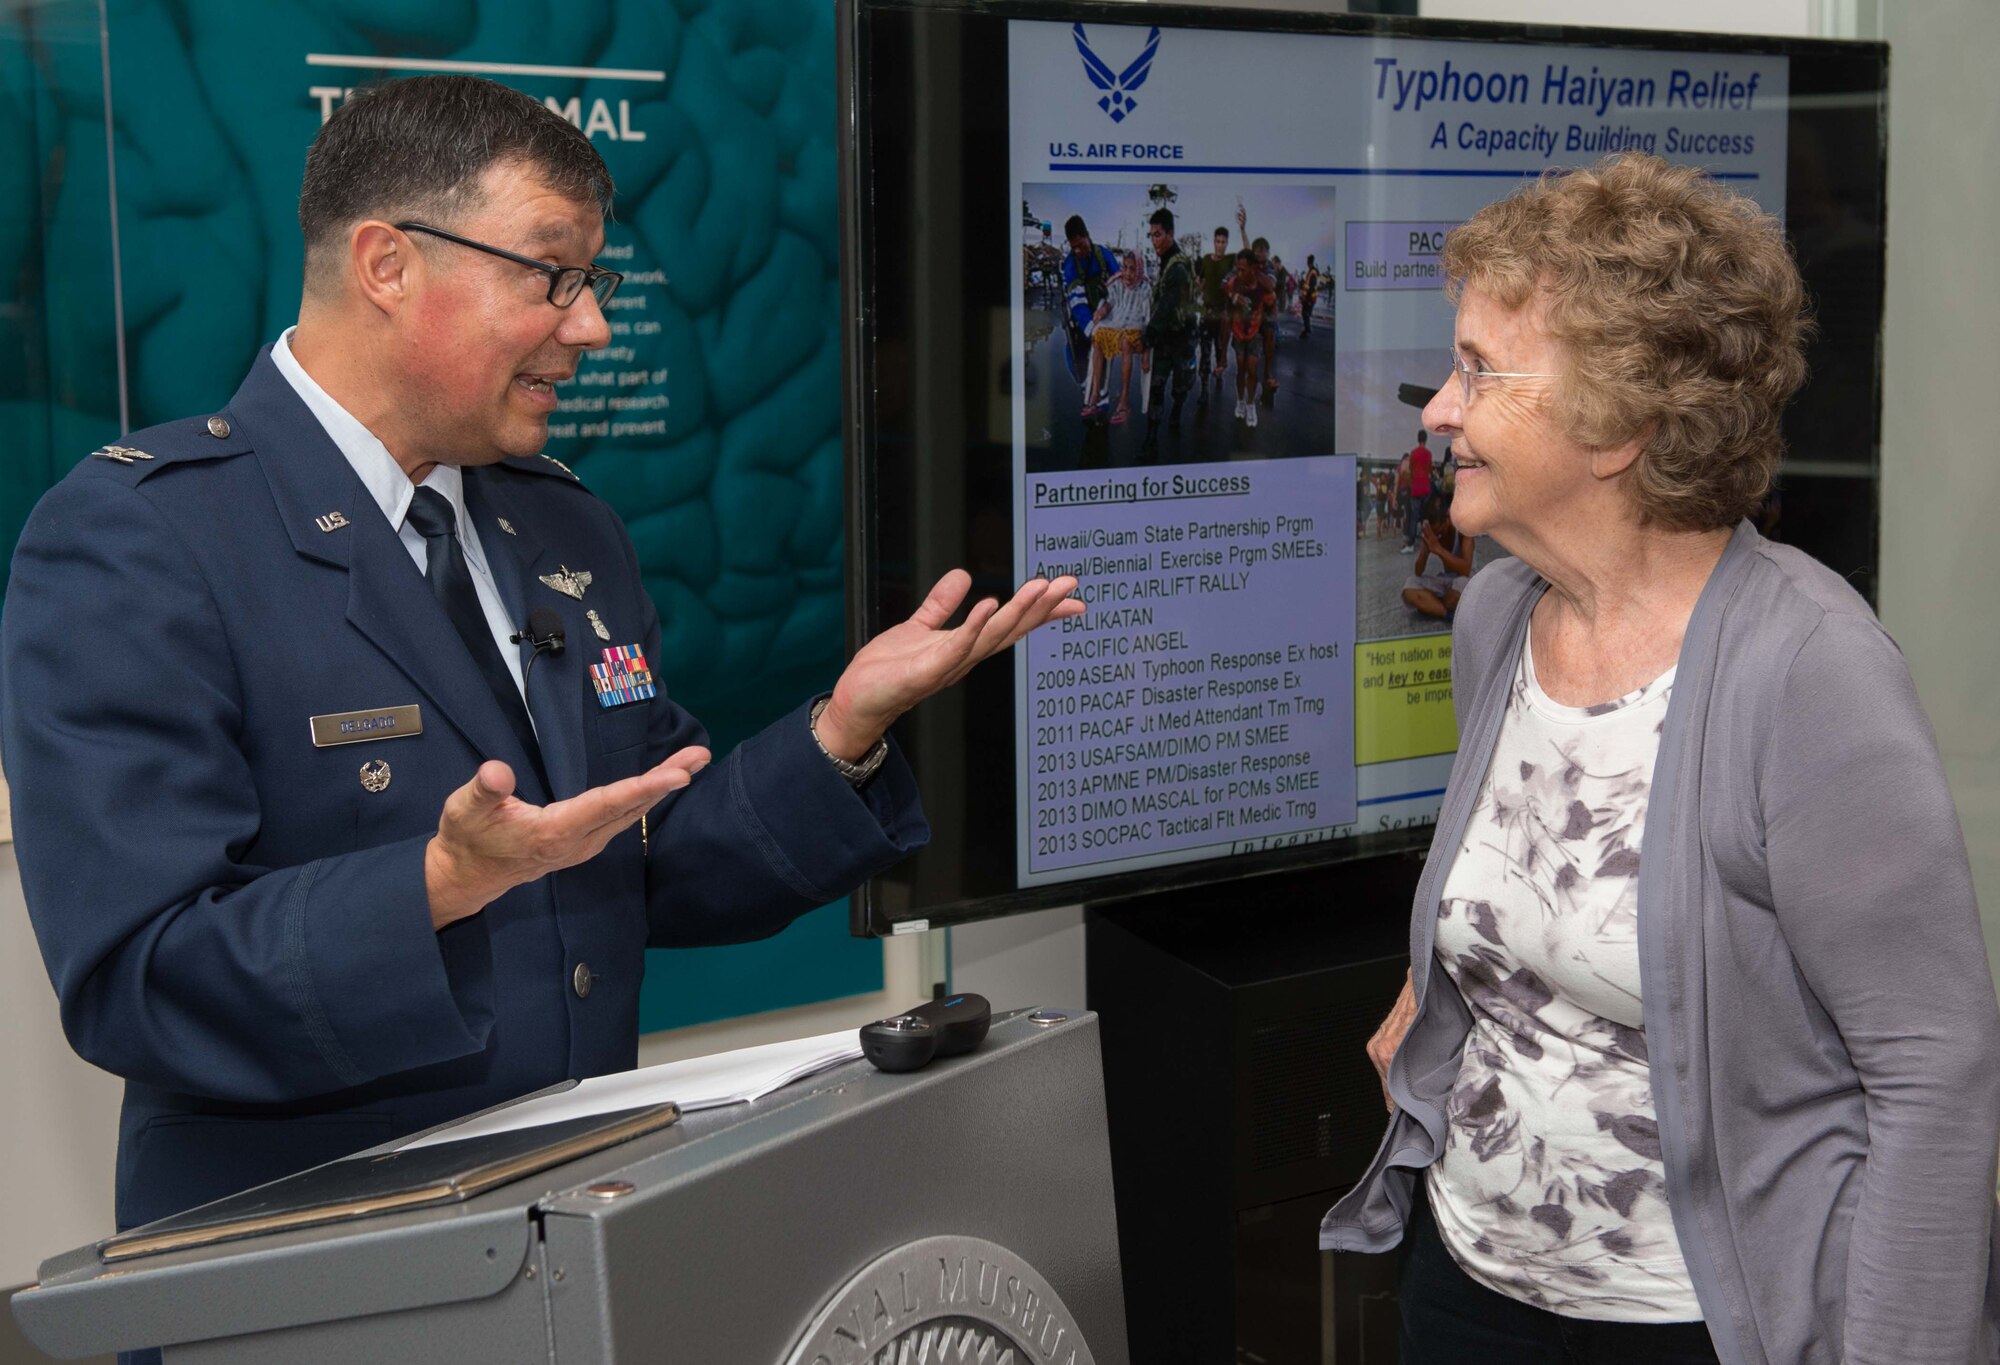 September 2016 Science Cafe.                            
U.S. Air Force Col. Antonio Jose Delgado, Medical Corps, speaks to a Medical Museum Science Café attendee following his talk. Col. Delgado, the interim director of the International Health Specialist Program at the Air Force Medical Support Agency, spoke about global health engagement at the National Museum of Health and Medicine on Tuesday, Sept. 27, 2016. (Disclosure: This image has been cropped to emphasize the subject.) (National Museum of Health and Medicine photo by Matthew Breitbart/ Released)